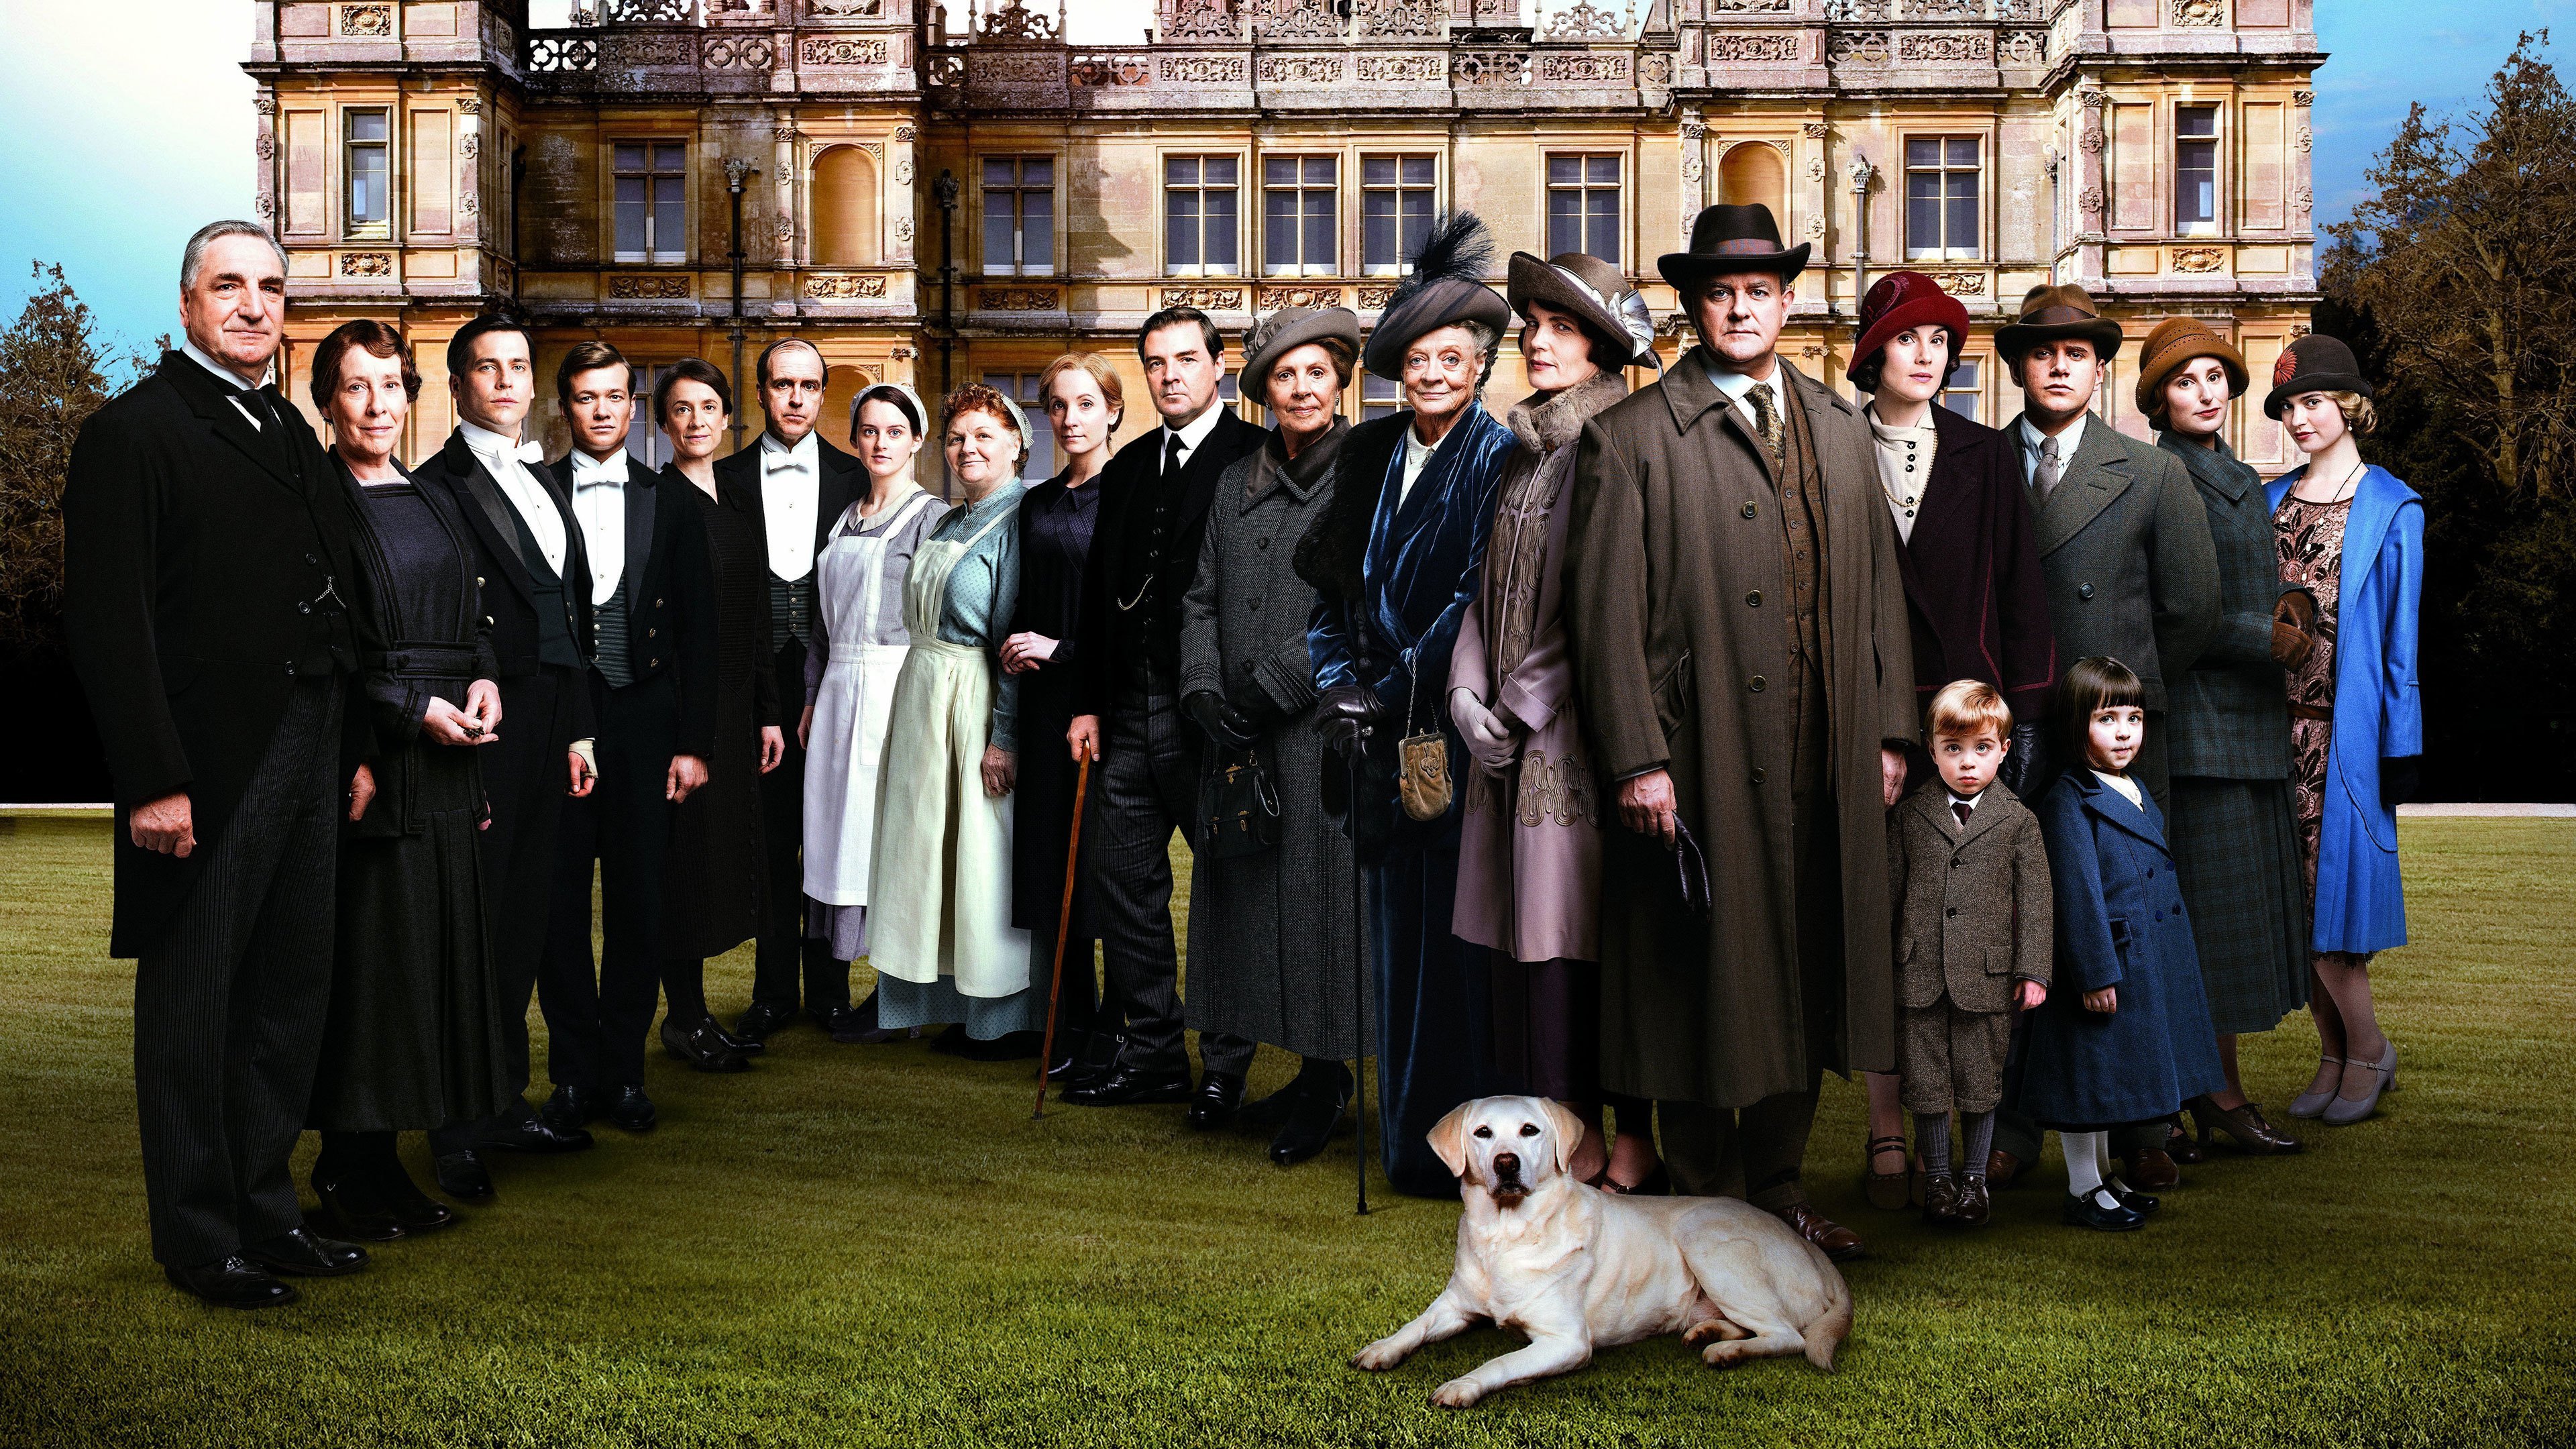 Download uhd 4k Downton Abbey PC background ID:212380 for free